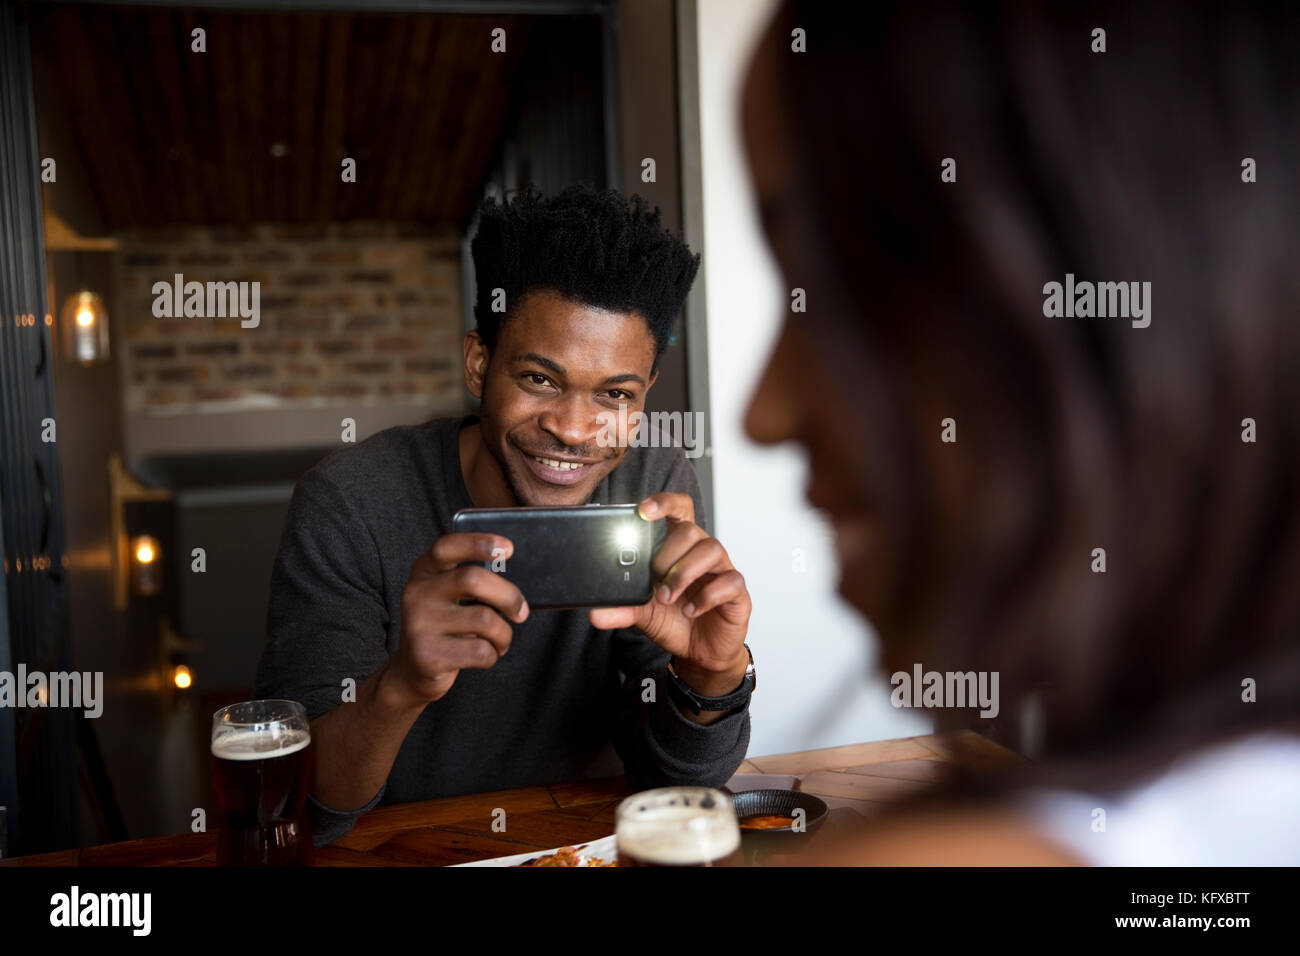 Man taking a photo of his date with a smartphone Stock Photo